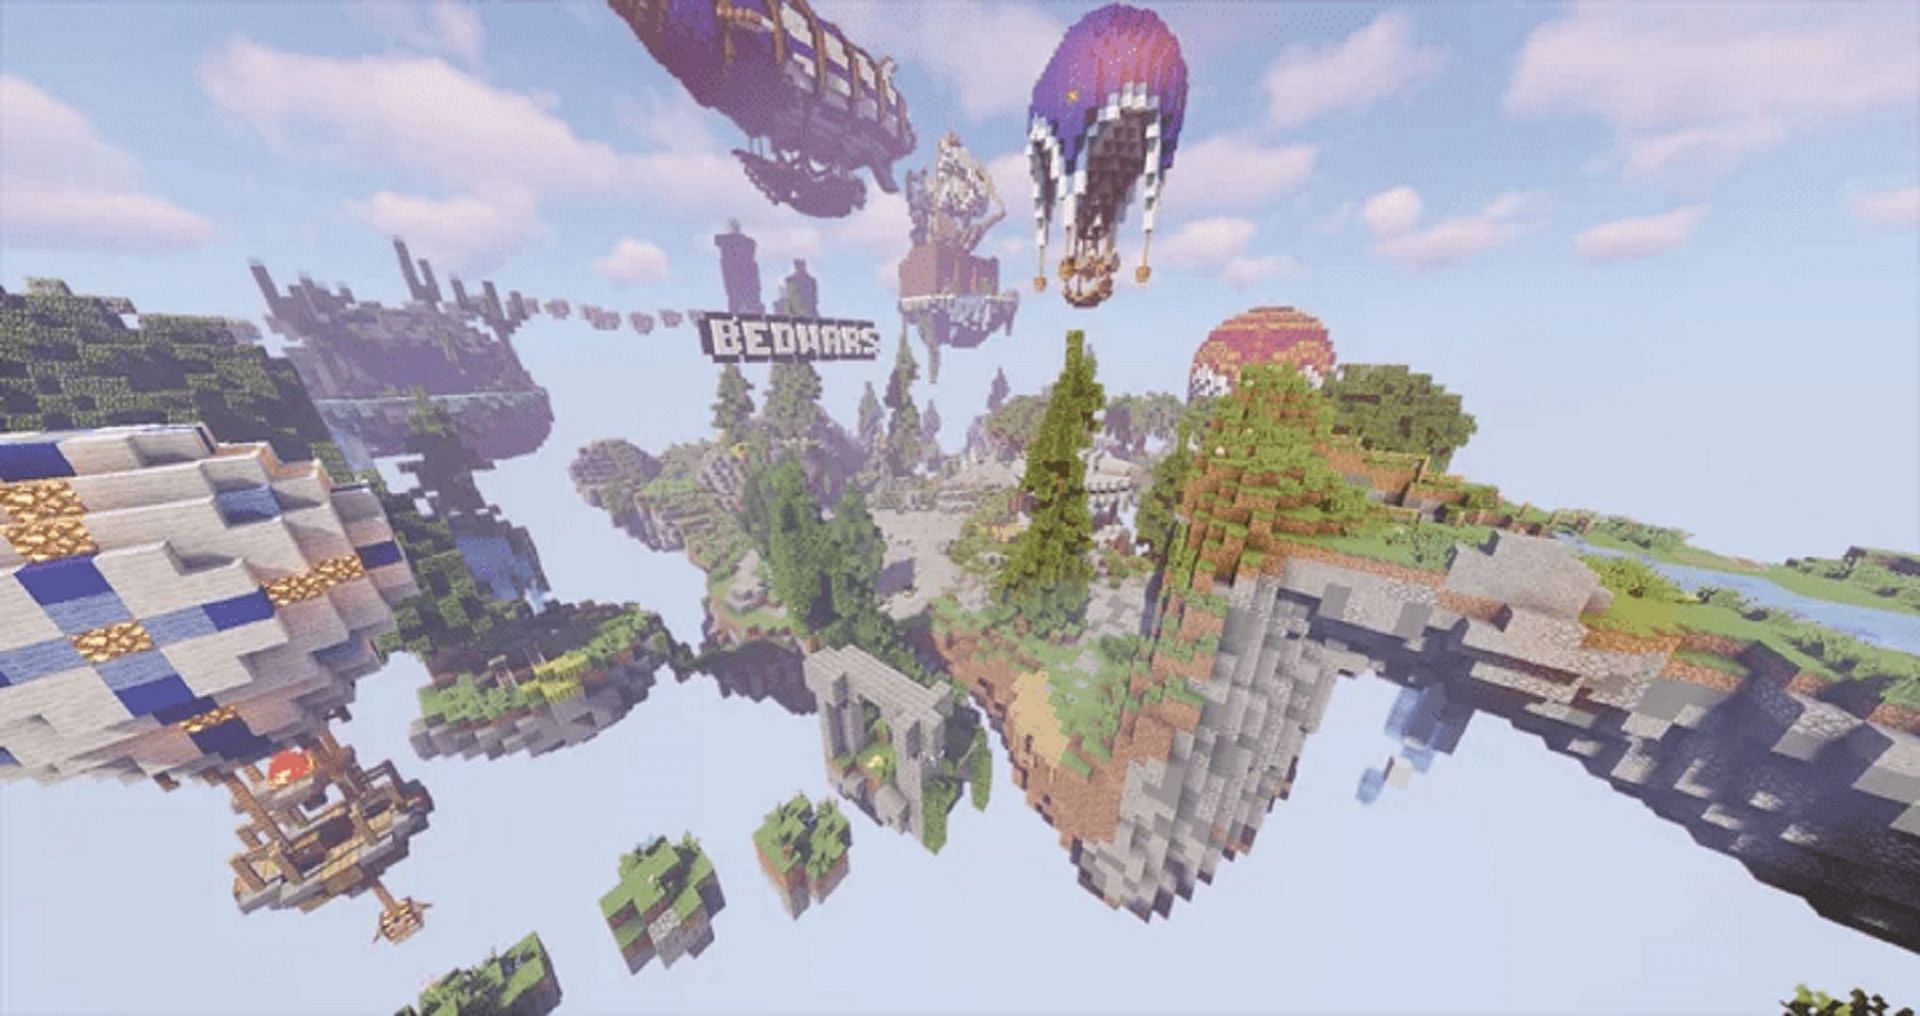 A minigame core map available for download (Image via Weark/PlanetMinecraft)